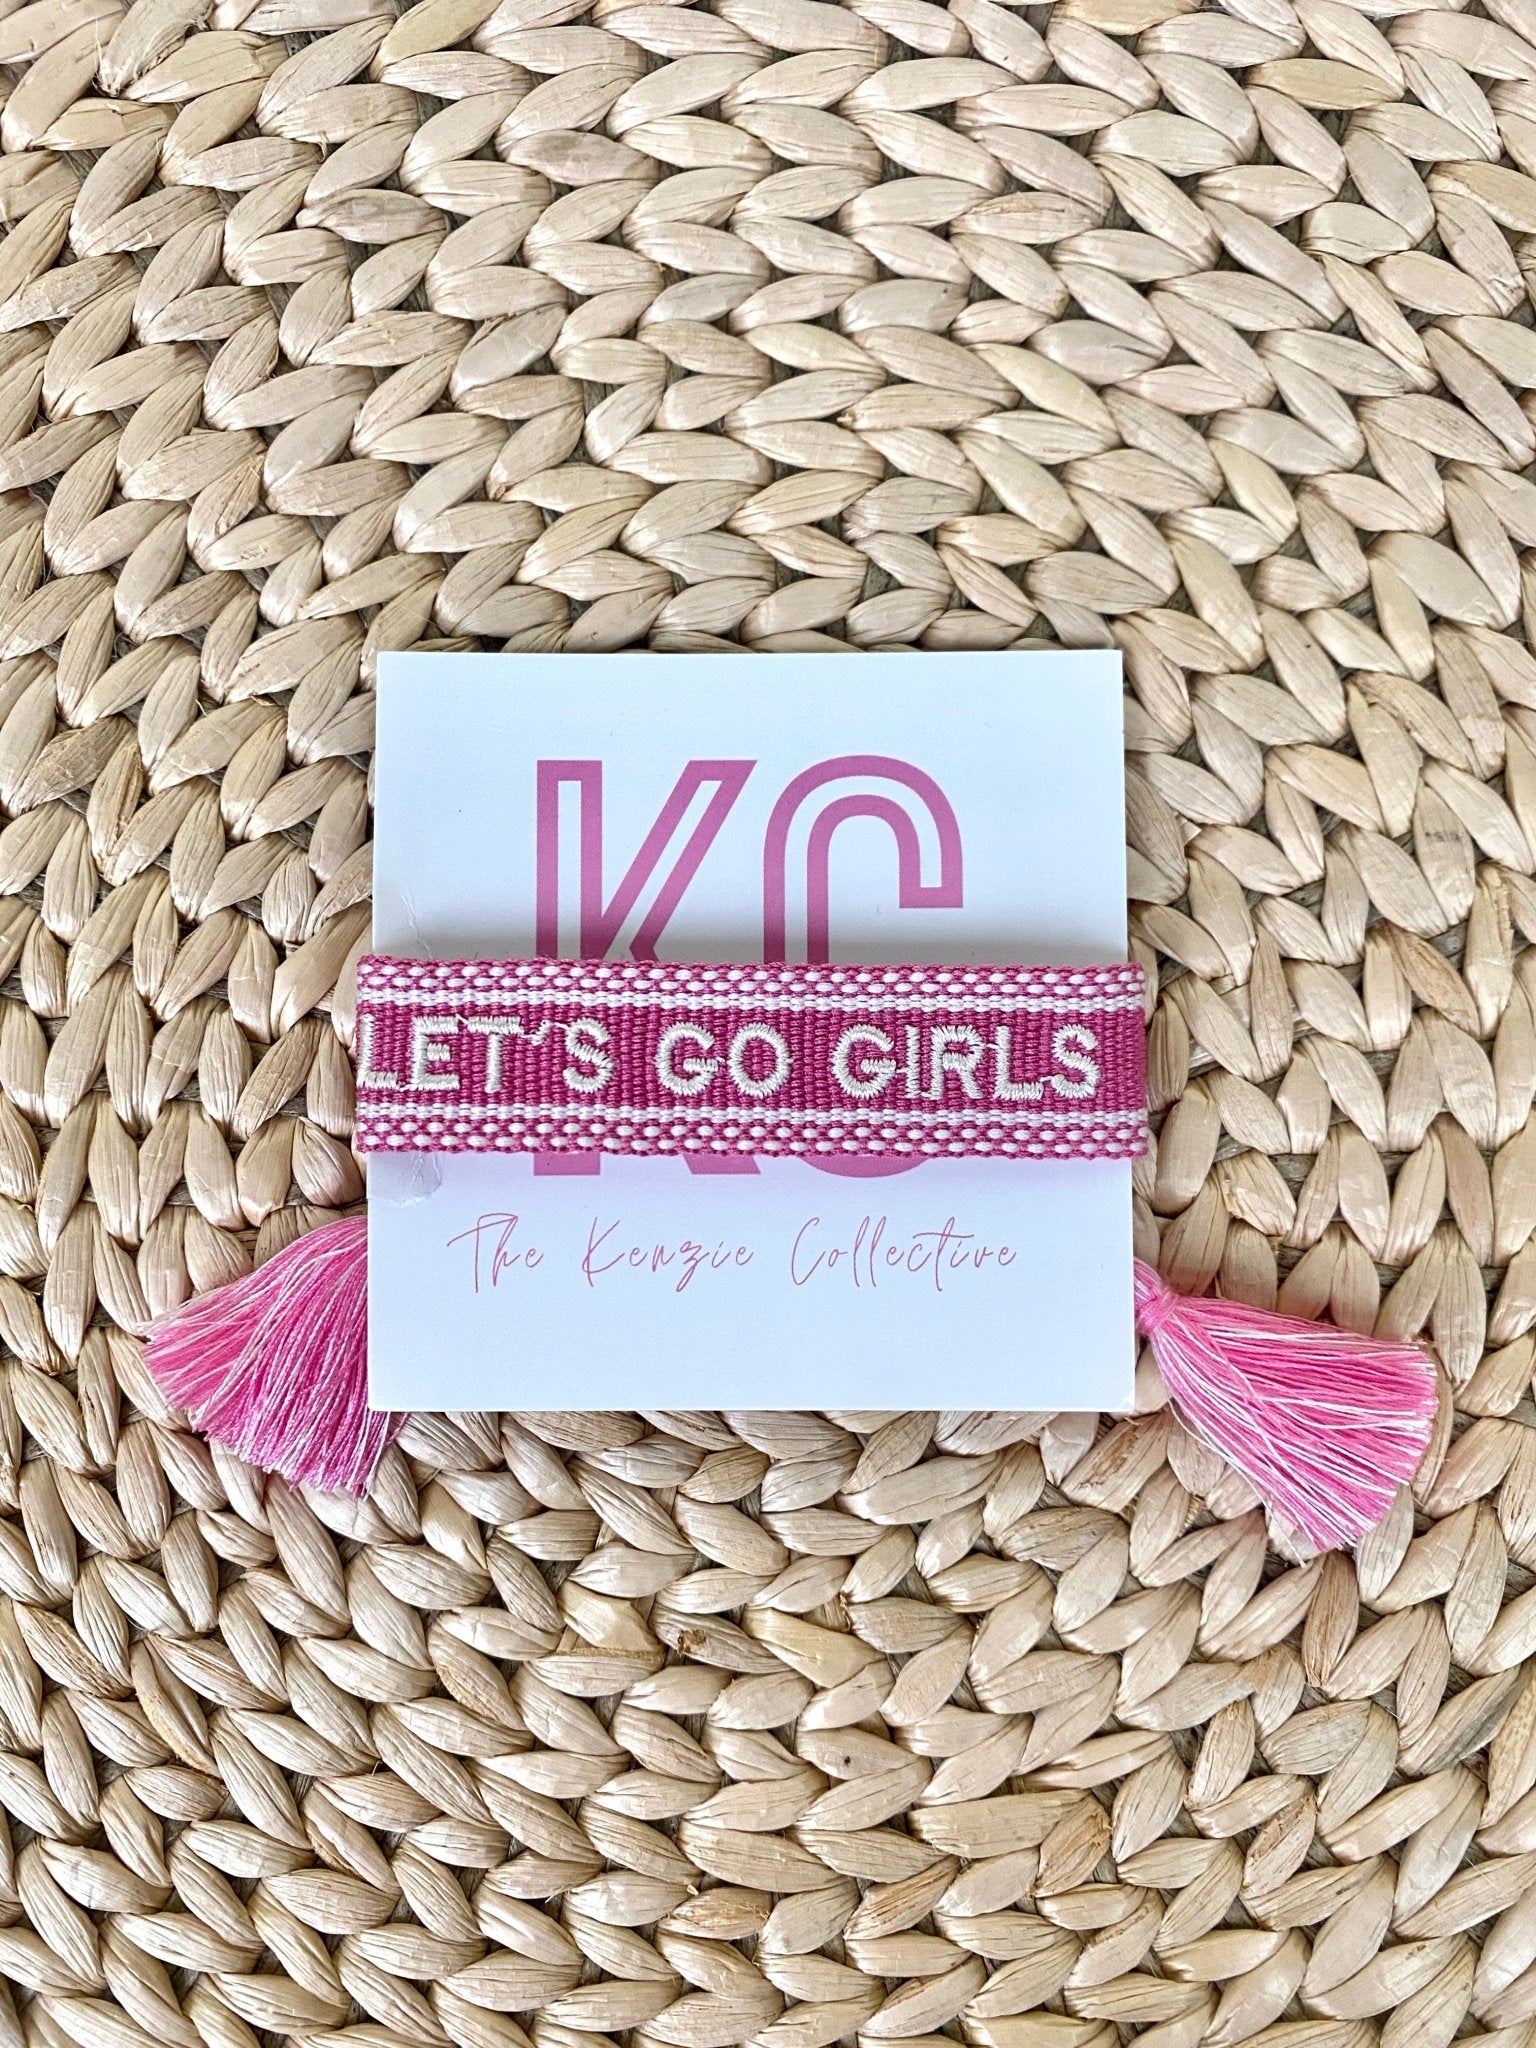 Lets go girls tassel bracelet pink - Stylish Bracelets - Affordable Jewelry and Belts at Lush Fashion Lounge Boutique in Oklahoma City